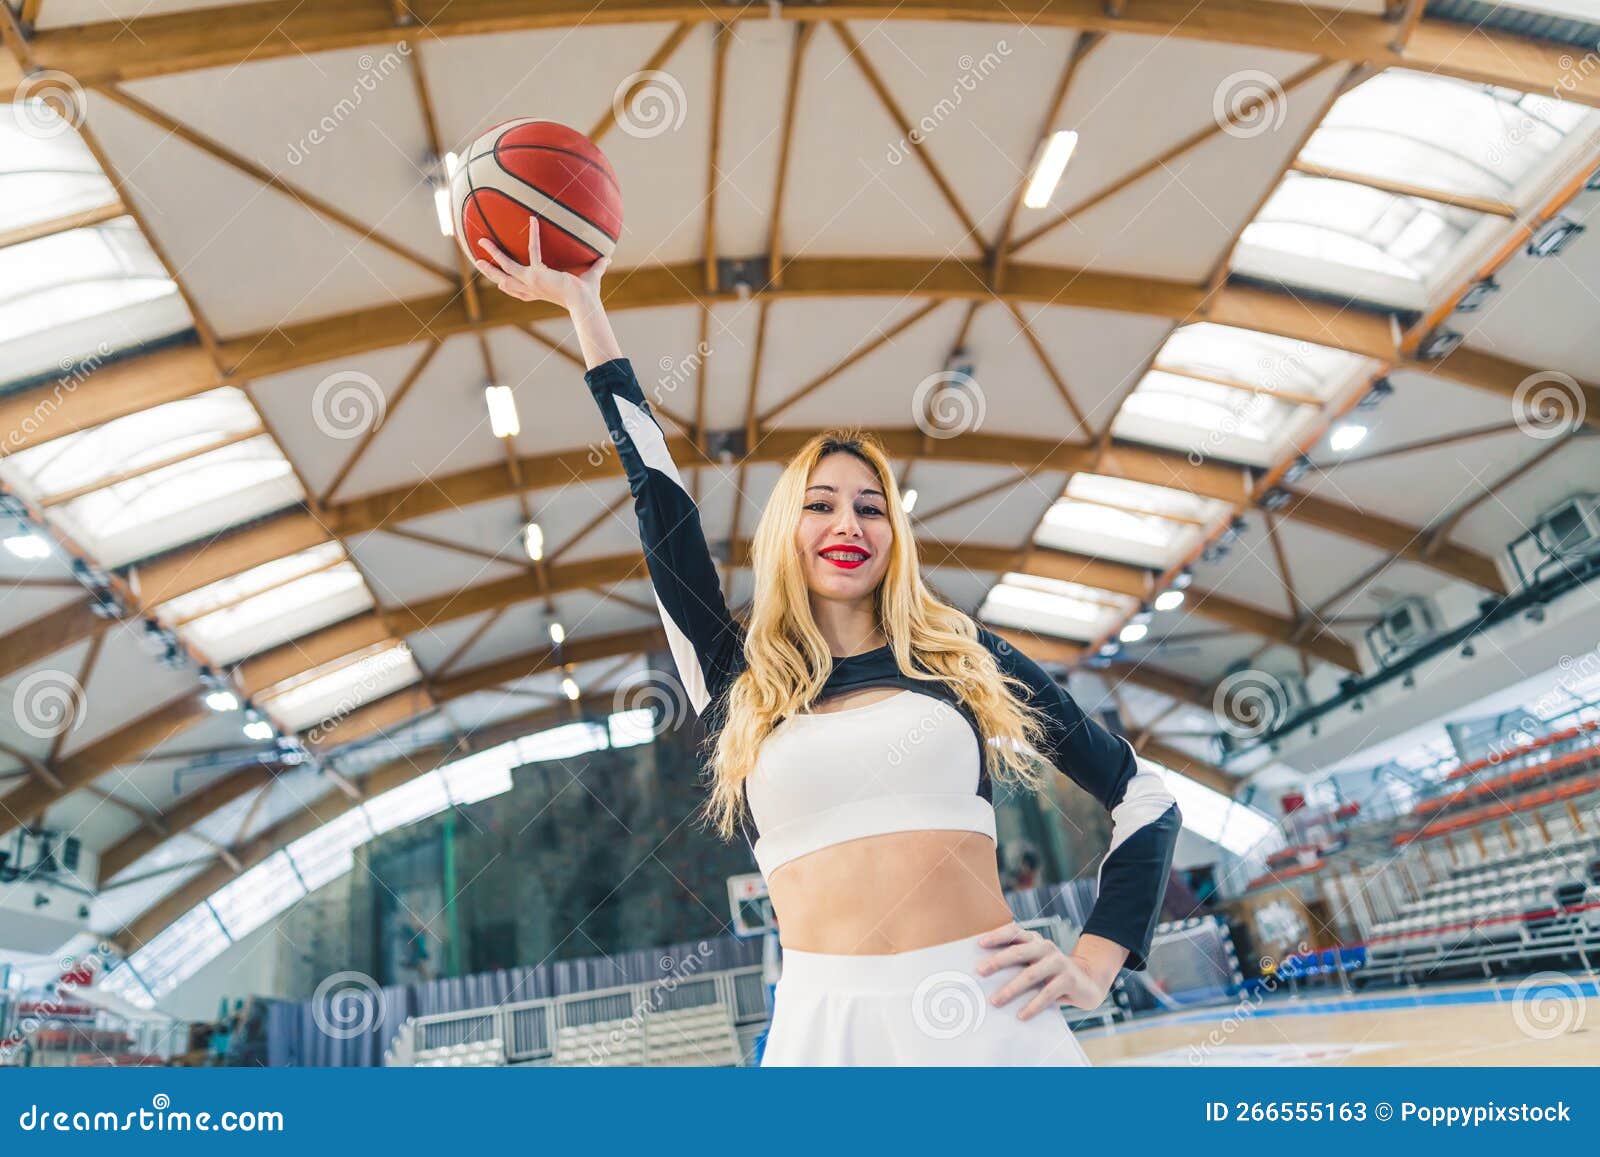 Low Angle Shot Of A Blond Cheerleader With A Stretched Arm Holding A